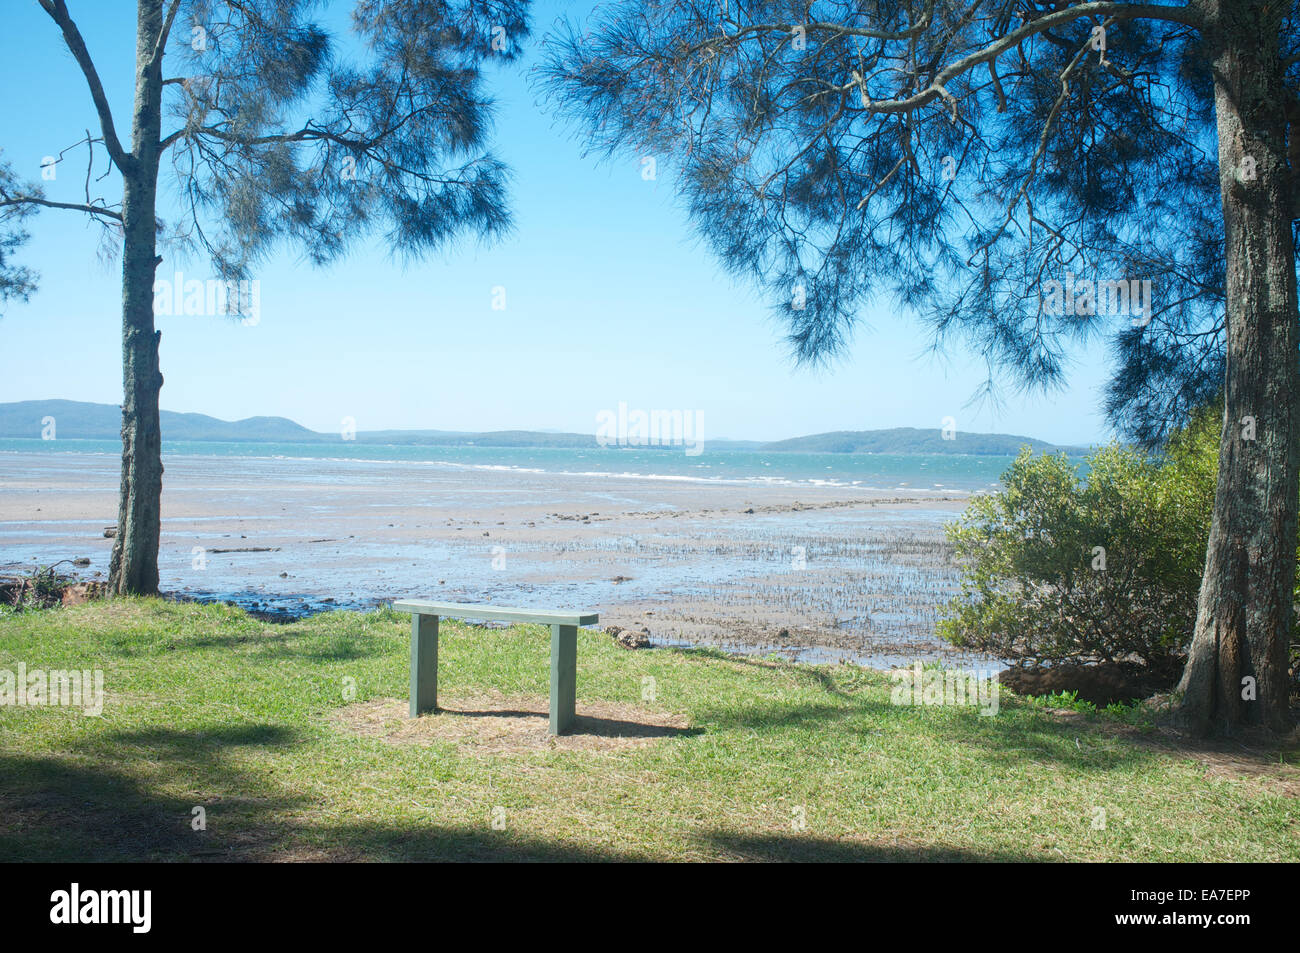 An empty bench overlooking the Port Stephens estuary in New South Wales, Australia Stock Photo